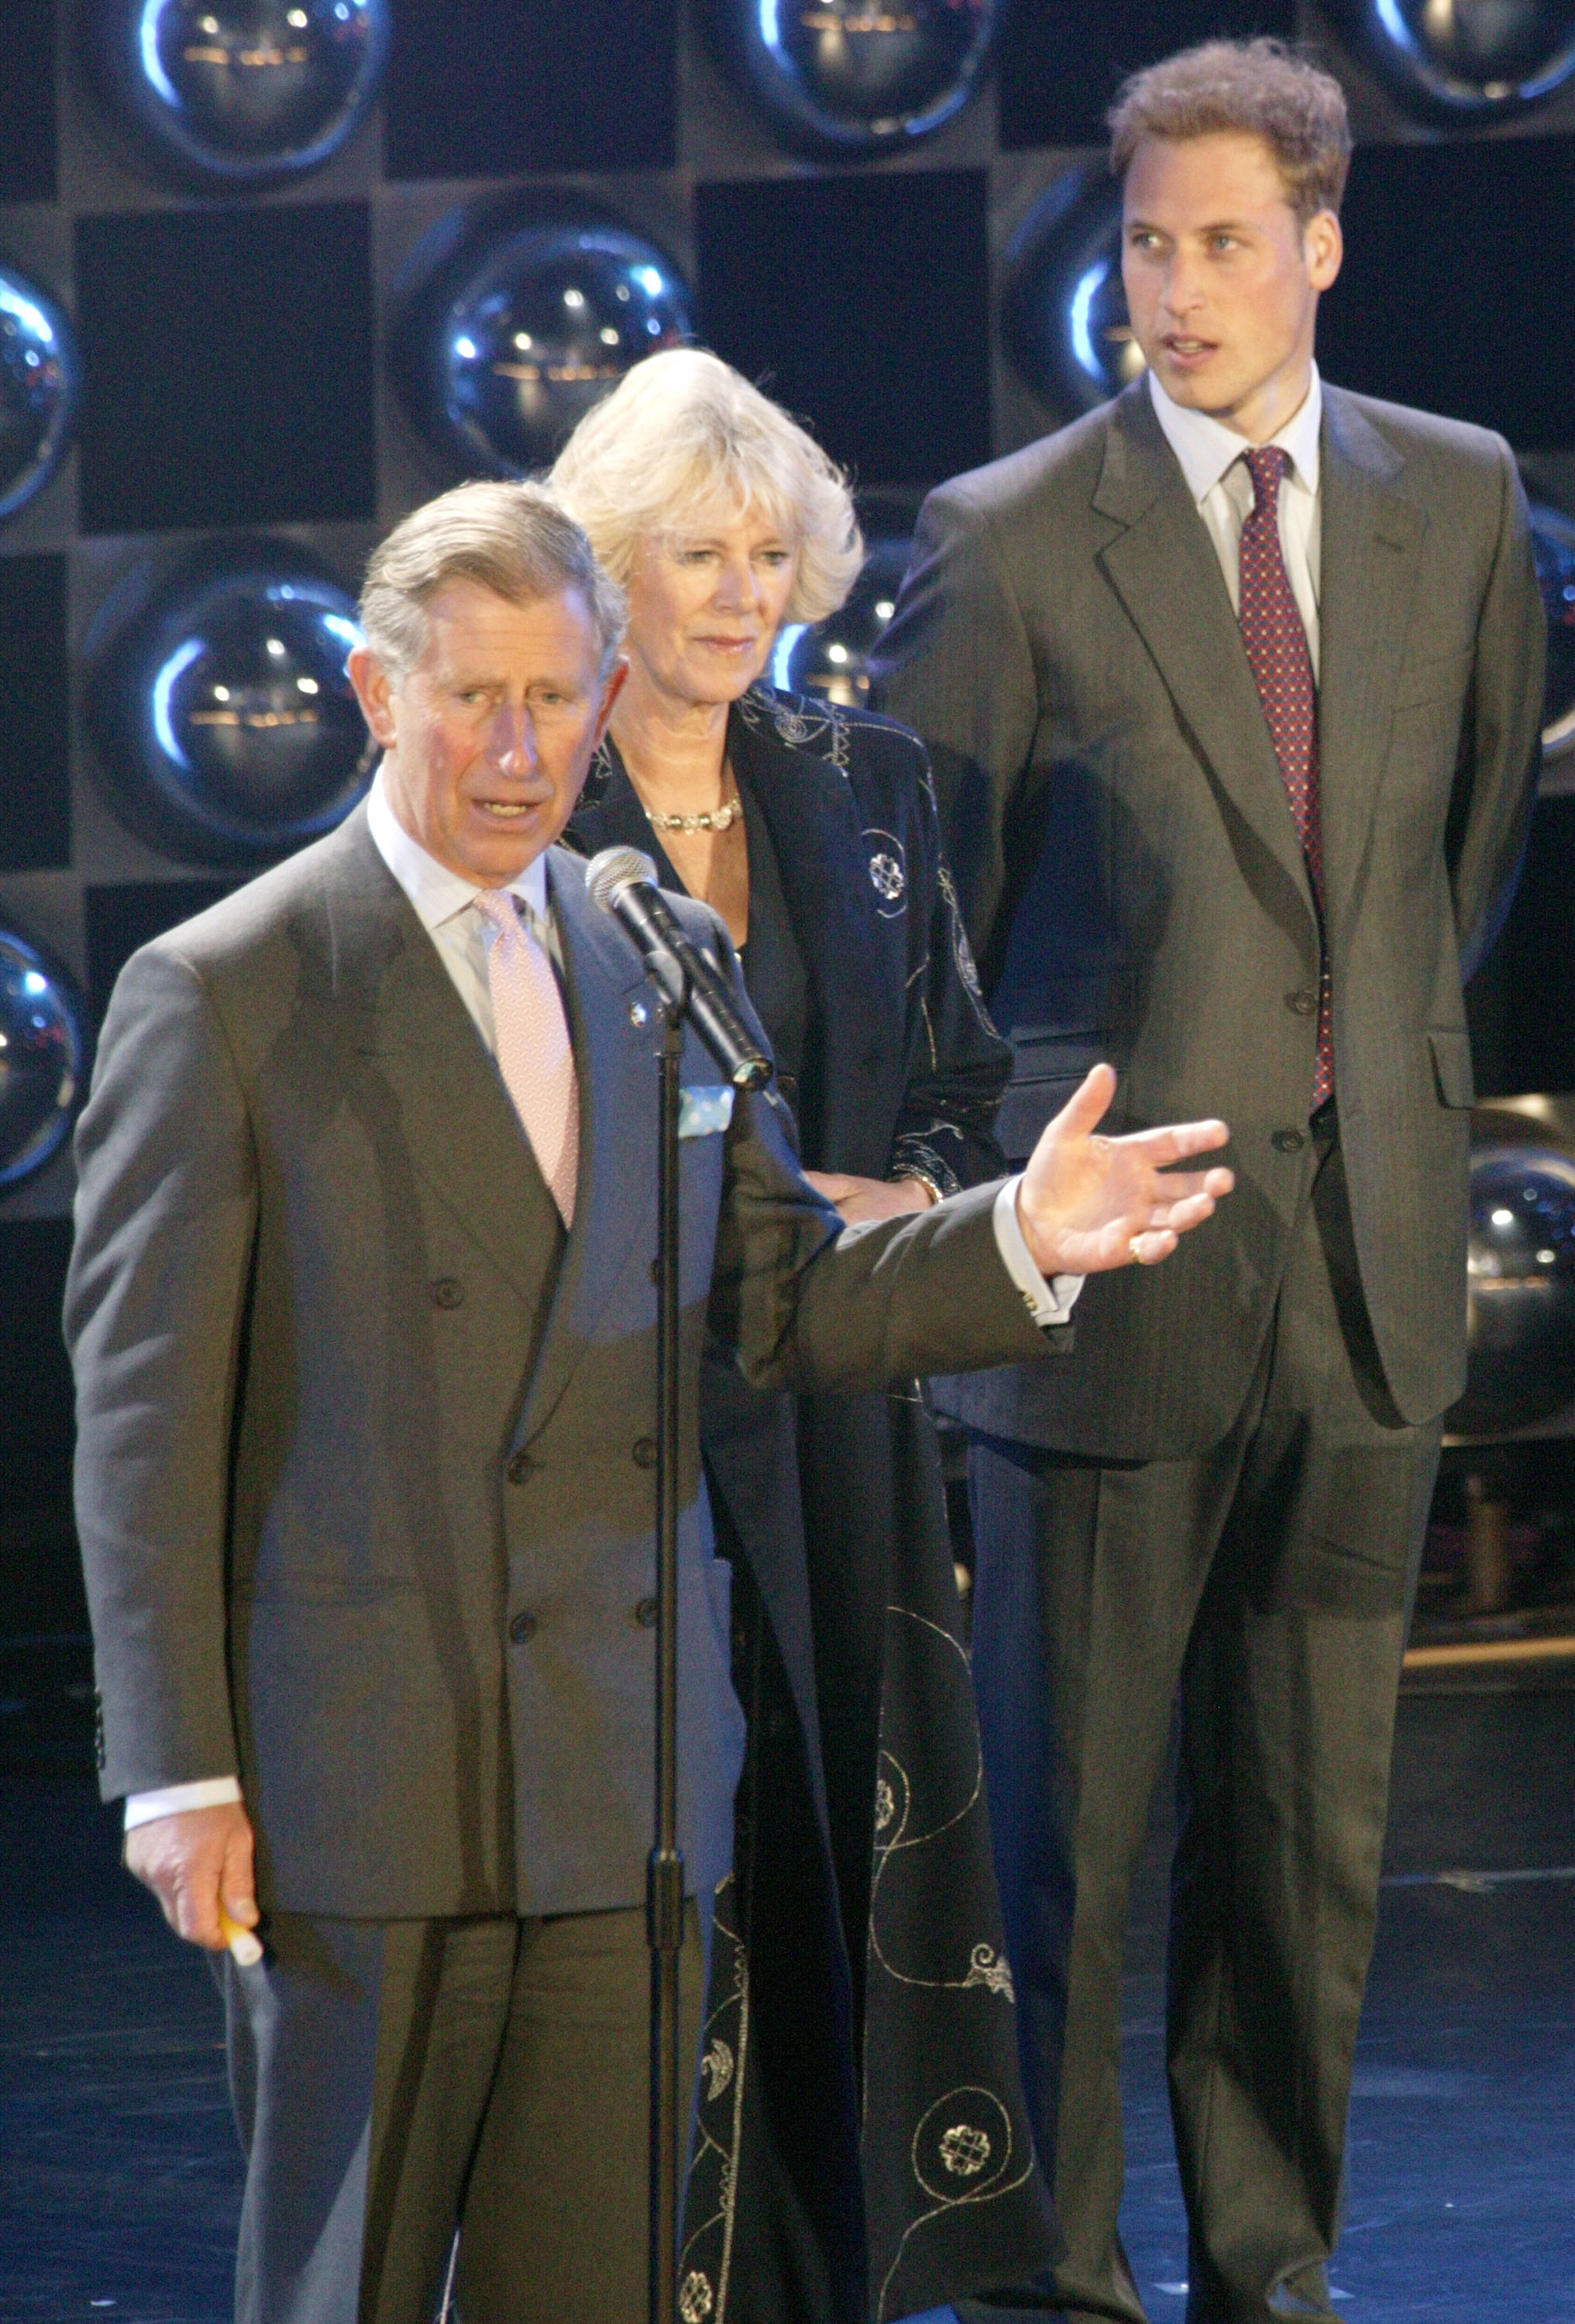 Prince Charles, Camilla Parker Bowles, Prince William onstage together at the Prince's Trust 30th Live